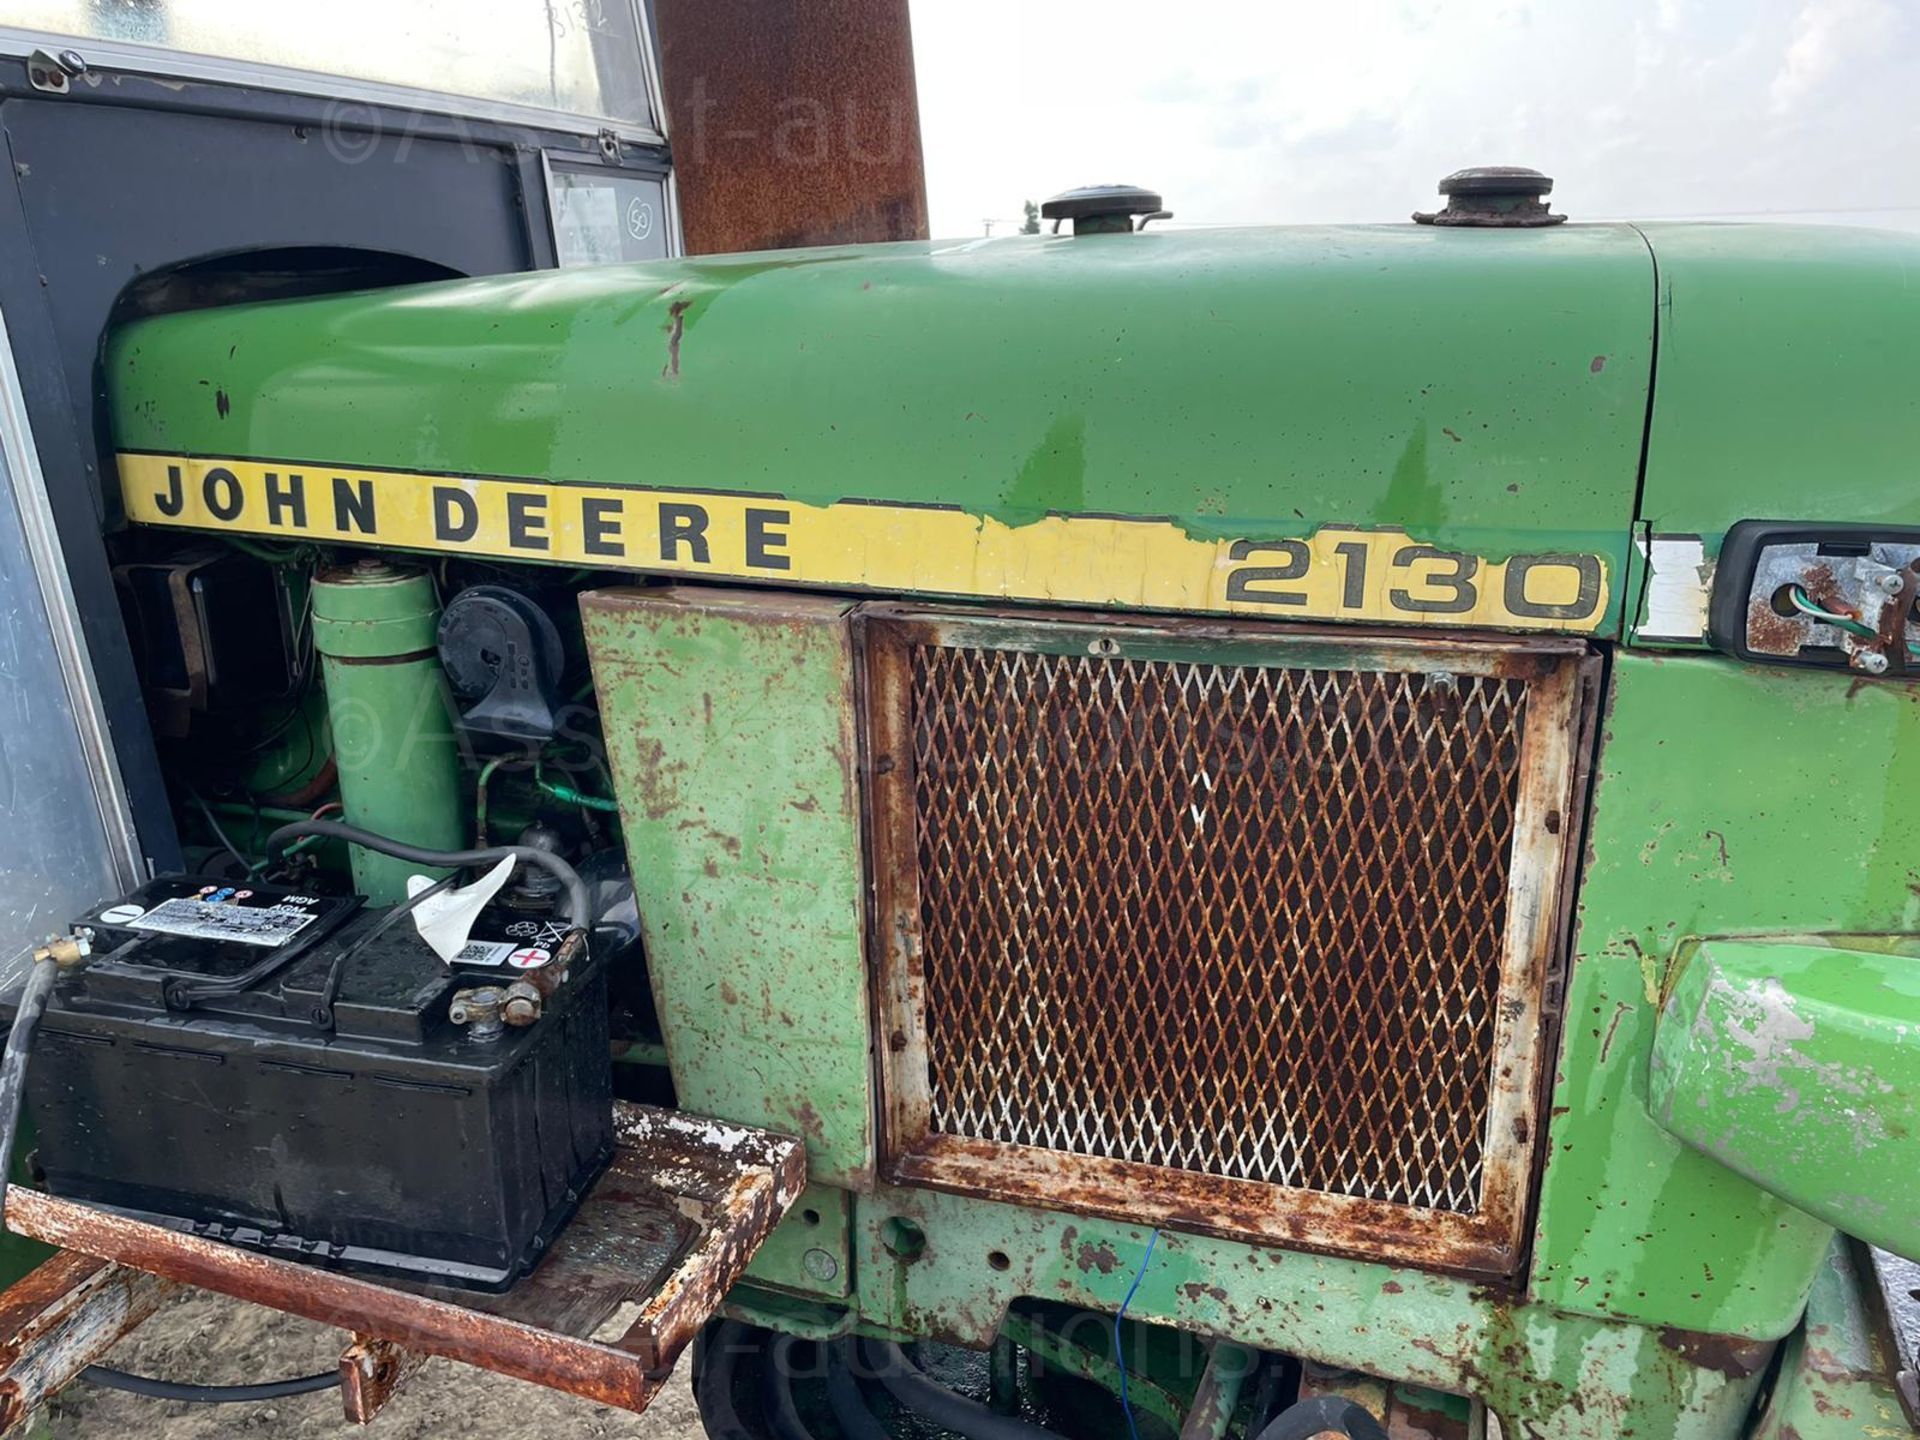 JOHN DEERE 2130 TRACTOR, RUNS AND DRIVES, ALL GEARS WORKS, 3 POINT LINKAGE, 79hp *PLUS VAT* - Image 11 of 11